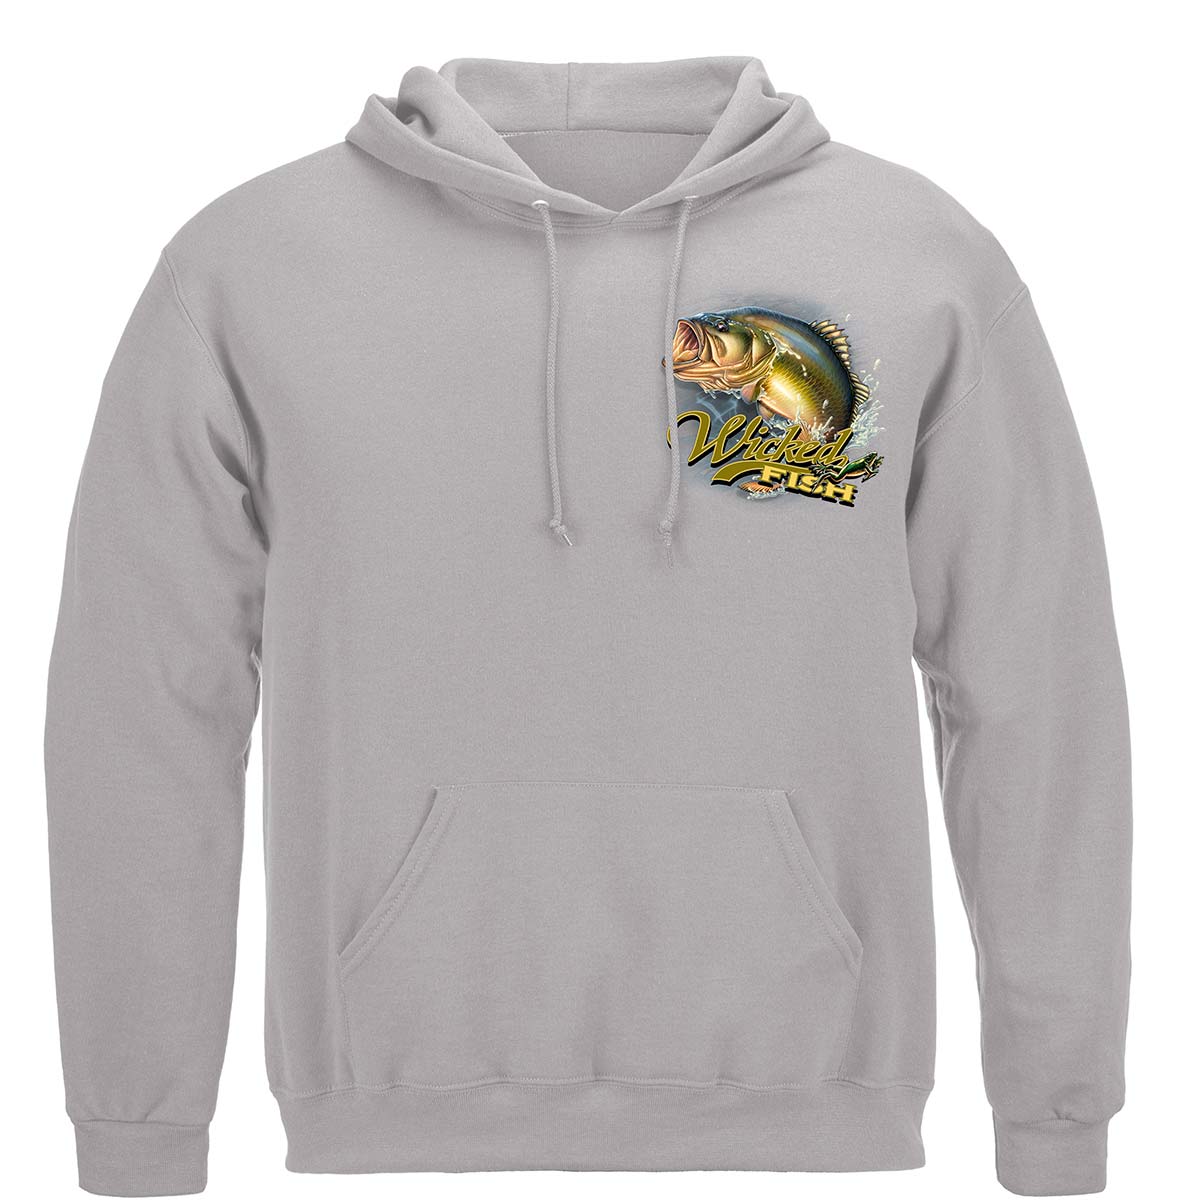 Wicked Fish Large Mouth Bass with Popper Jumping Frog Premium Hooded Sweat Shirt, Hoodie / Large